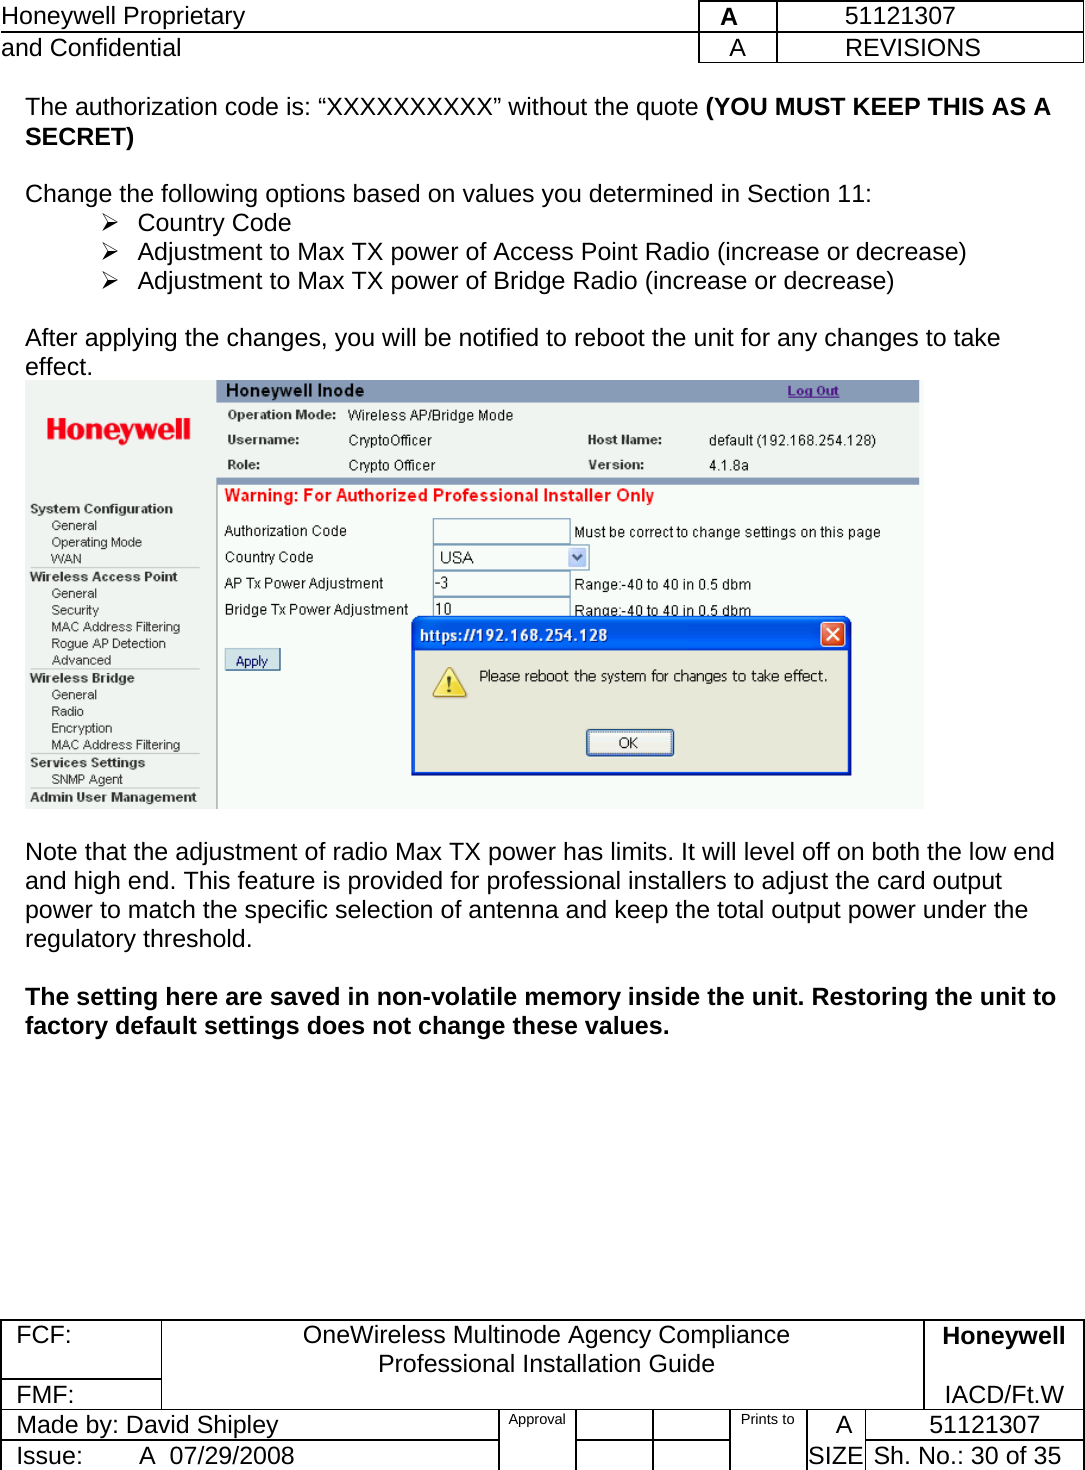 Honeywell Proprietary    A         51121307 and Confidential  A           REVISIONS  FCF:  OneWireless Multinode Agency Compliance Professional Installation Guide  Honeywell FMF:               IACD/Ft.W Made by: David Shipley  Approval   Prints to     A           51121307 Issue:        A  07/29/2008          SIZE  Sh. No.: 30 of 35  The authorization code is: “XXXXXXXXXX” without the quote (YOU MUST KEEP THIS AS A SECRET)  Change the following options based on values you determined in Section 11:   ¾ Country Code ¾  Adjustment to Max TX power of Access Point Radio (increase or decrease) ¾  Adjustment to Max TX power of Bridge Radio (increase or decrease)  After applying the changes, you will be notified to reboot the unit for any changes to take effect.   Note that the adjustment of radio Max TX power has limits. It will level off on both the low end and high end. This feature is provided for professional installers to adjust the card output power to match the specific selection of antenna and keep the total output power under the regulatory threshold.  The setting here are saved in non-volatile memory inside the unit. Restoring the unit to factory default settings does not change these values.  